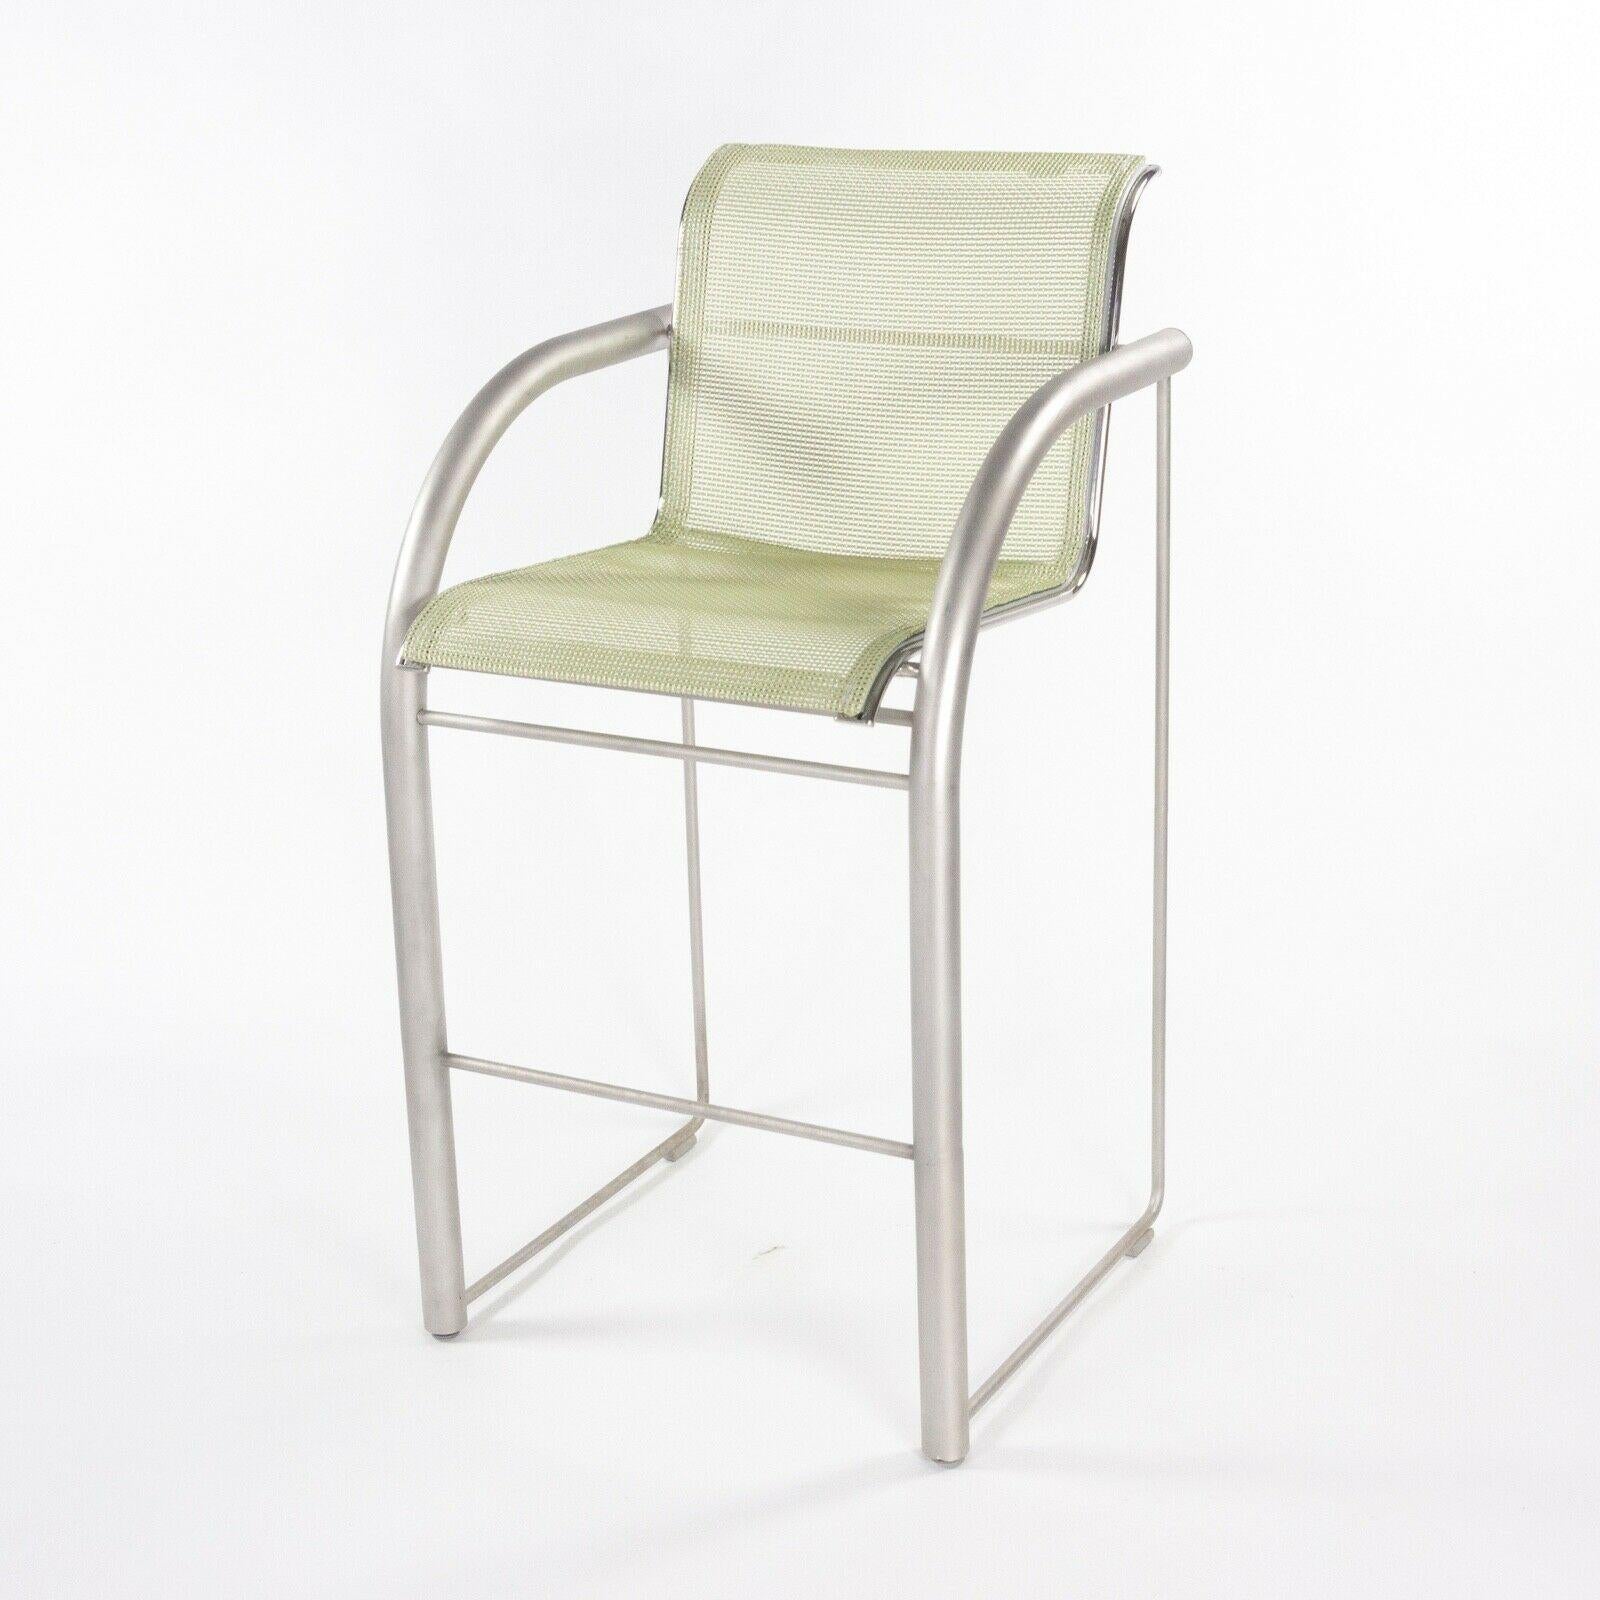 Prototype Richard Schultz 2002 Collection Stainless Bar Stool with Outdoor Mesh 5